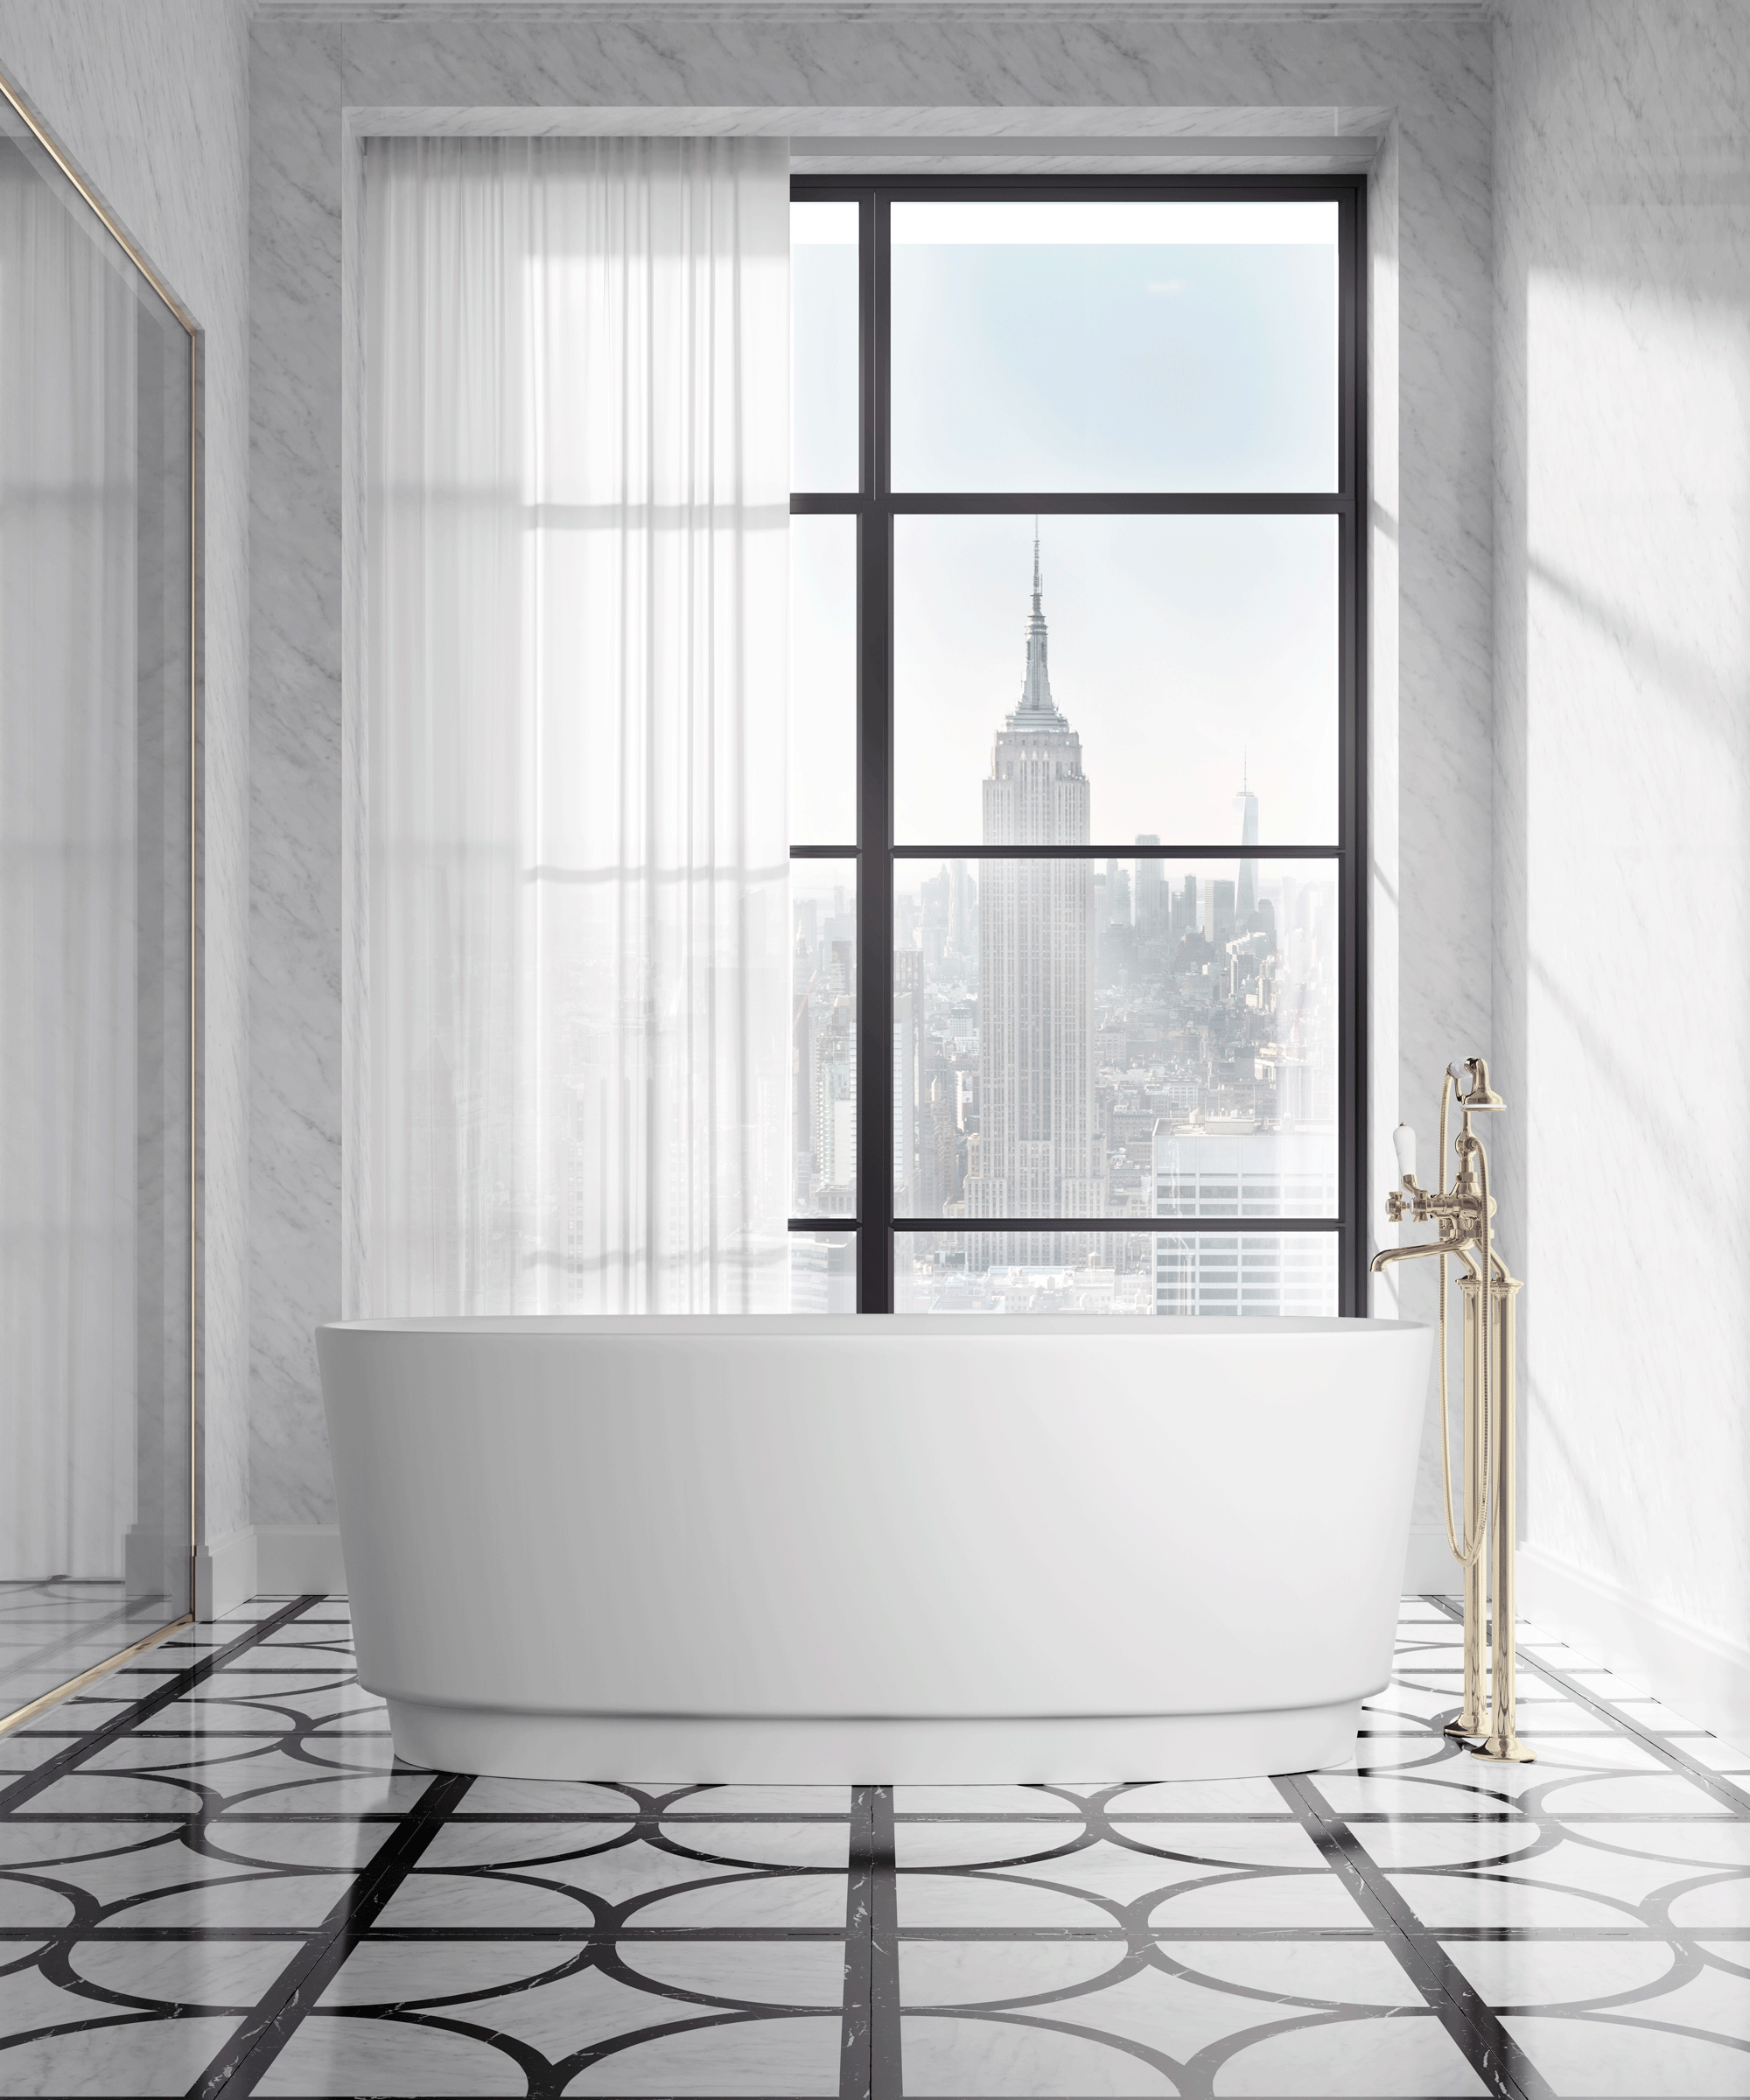 Monochrome bathroom with bold black and white patterned marble floor